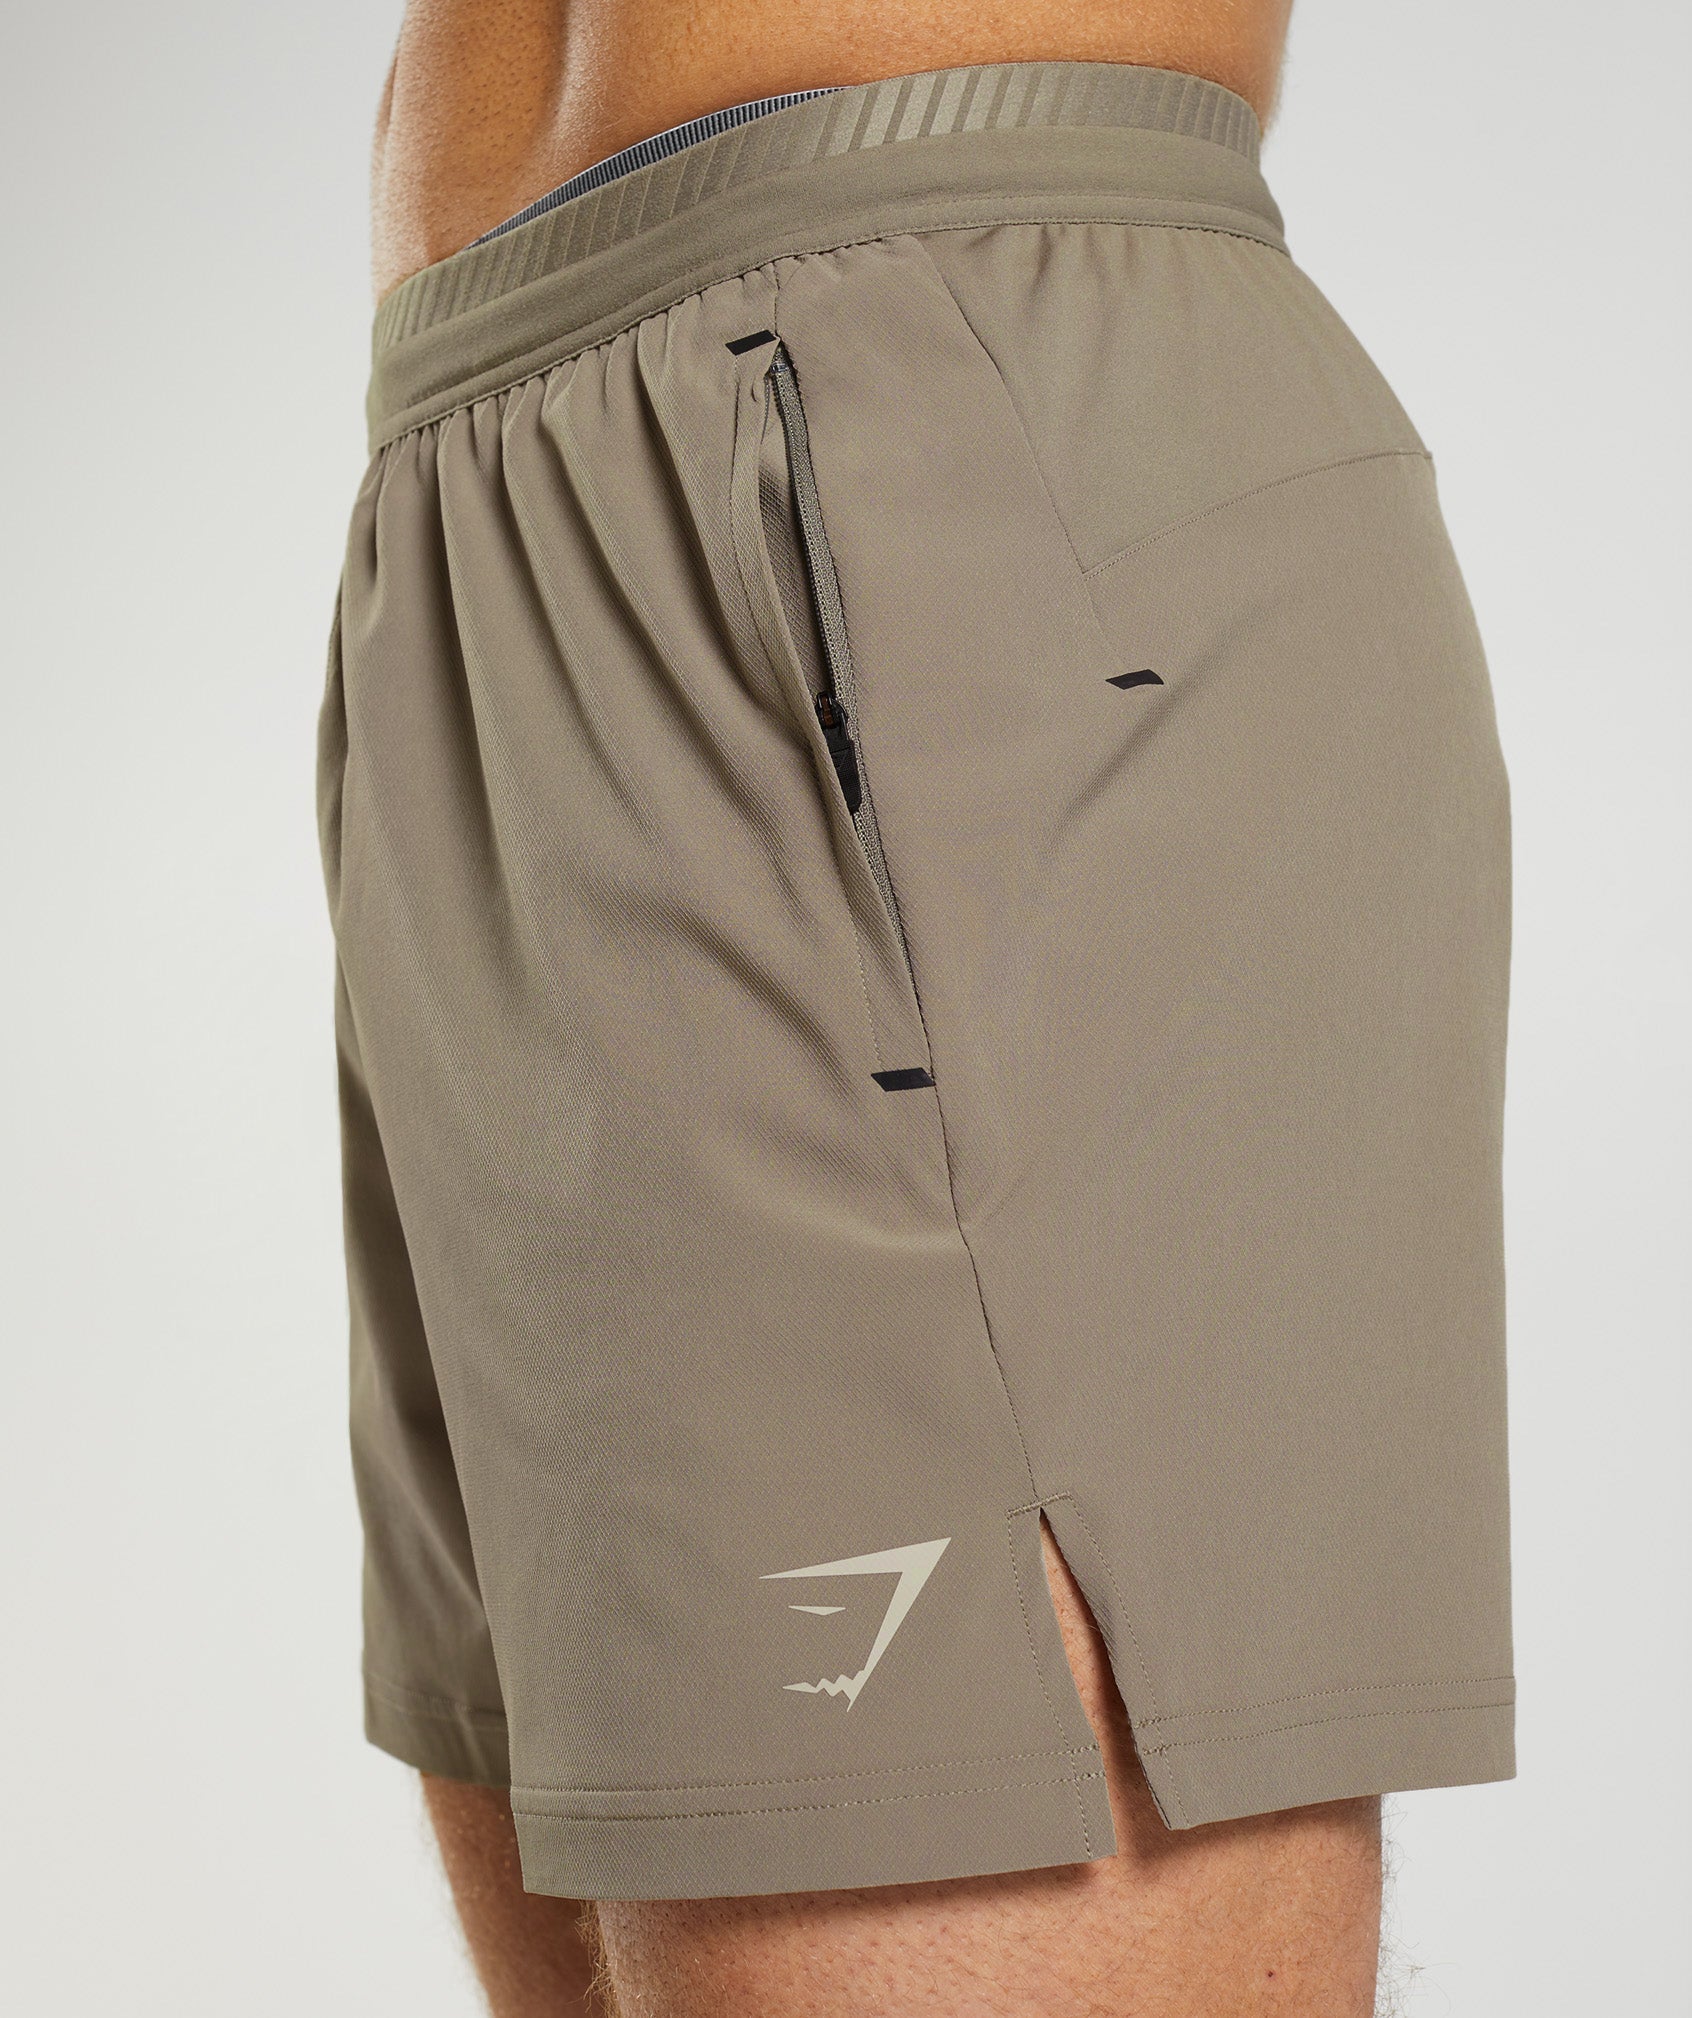 Apex 5" Hybrid Shorts in Earthy Brown - view 5